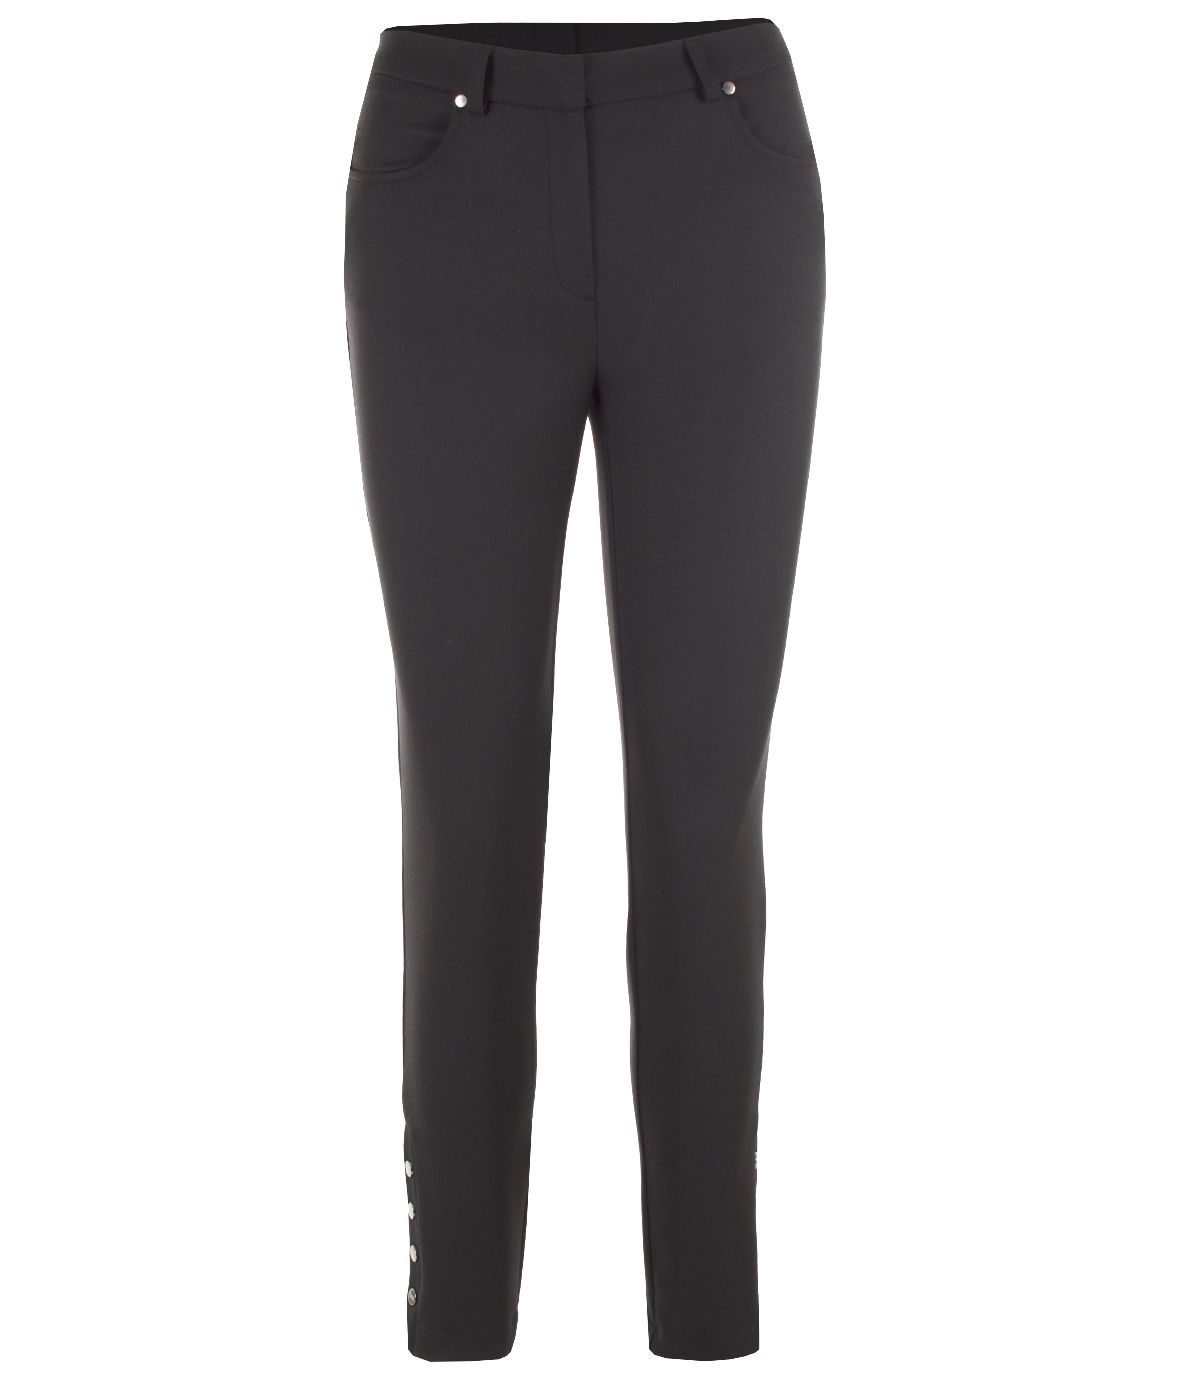 Skinny trousers with decorative metallic buttons in the downside part of the leg 0